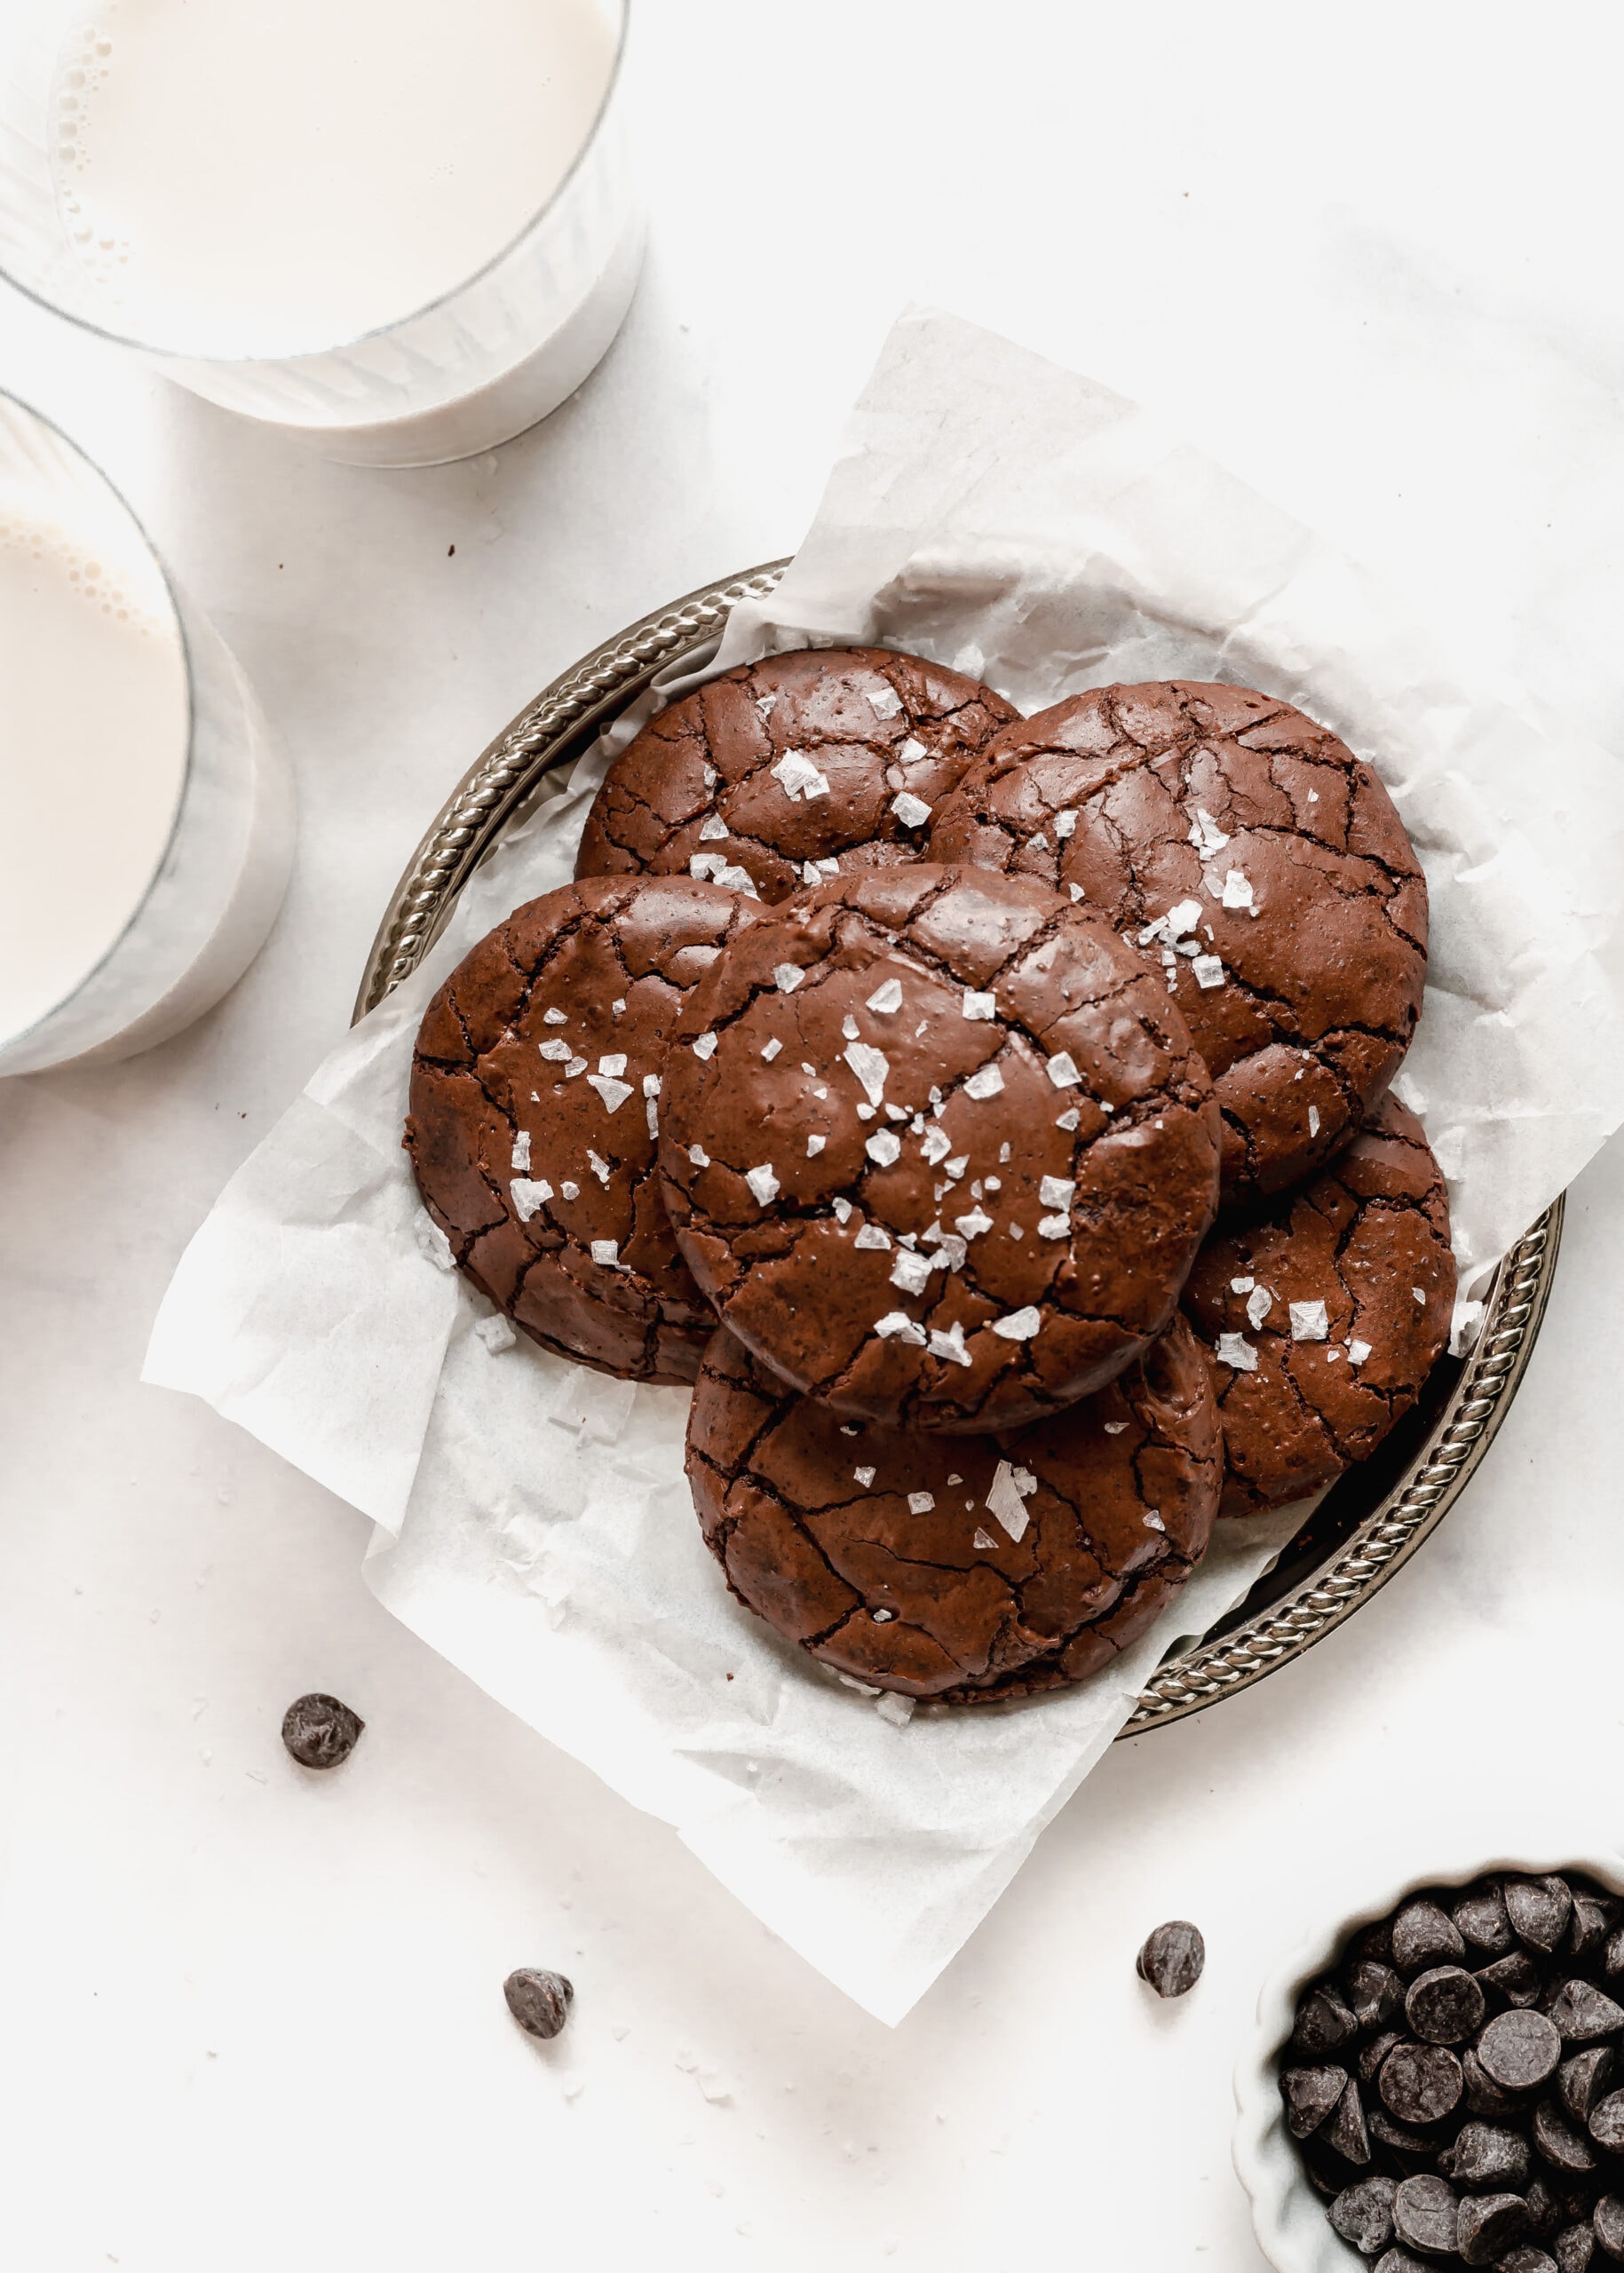 Six large chocolate brownie cookies on a silver platter with white parchment paper, next to two glasses of cold milk. Across from the silver tray in a small white bowl of dark chocolate chips.